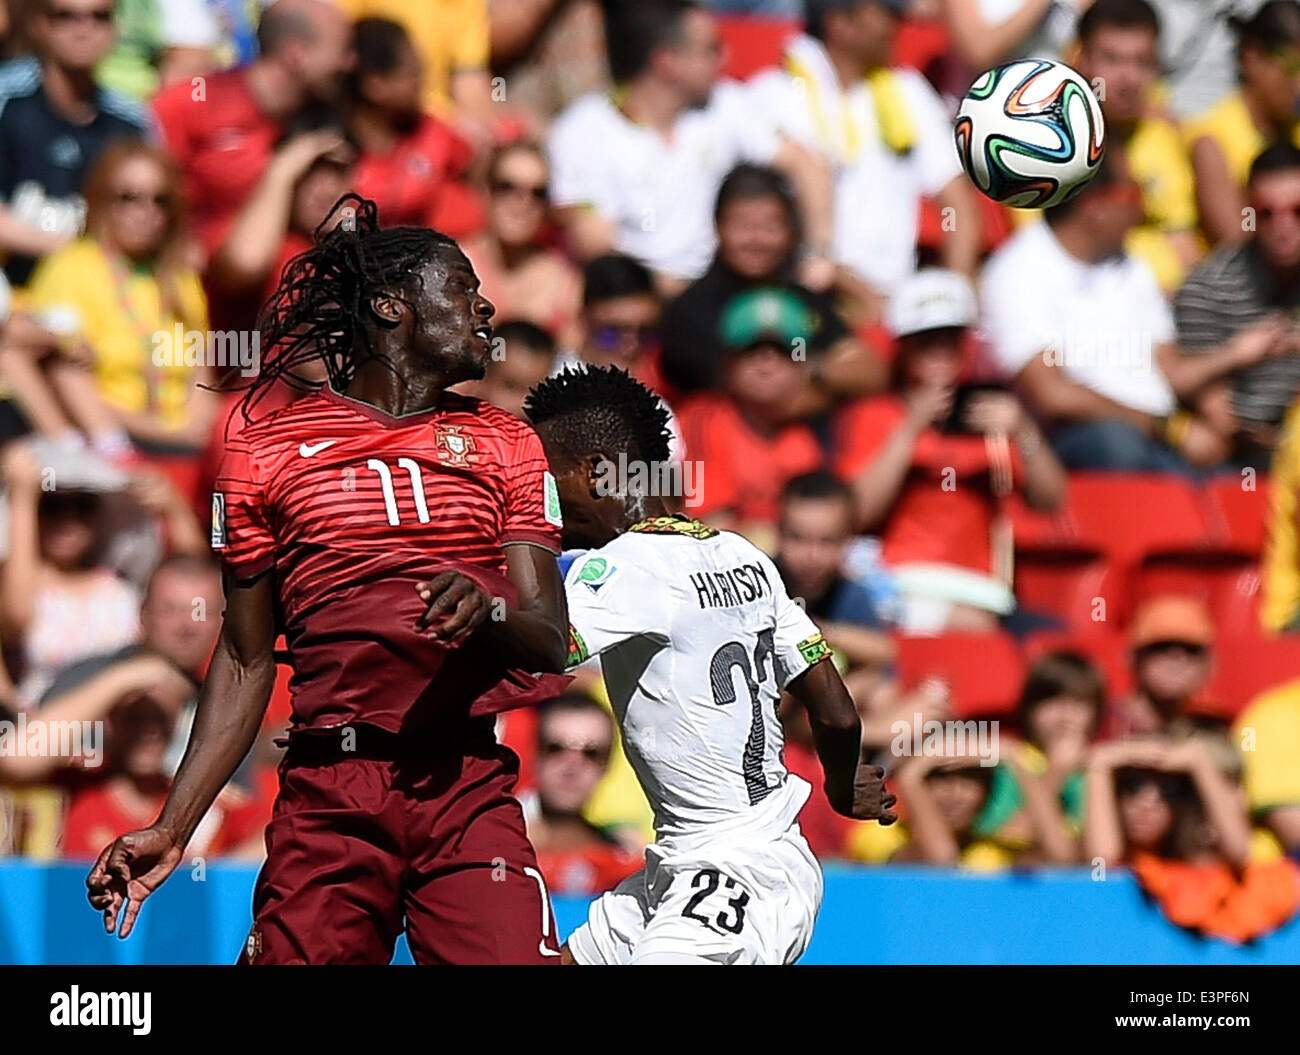 Brasilia, Brazil. 26th June, 2014. Portugal's Eder (L) vies with Ghana's Harrison Afful during a Group G match between Portugal and Ghana of 2014 FIFA World Cup at the Estadio Nacional Stadium in Brasilia, Brazil, June 26, 2014. Portugal won 2-1 over Ghana on Thursday. © Qi Heng/Xinhua/Alamy Live News Stock Photo